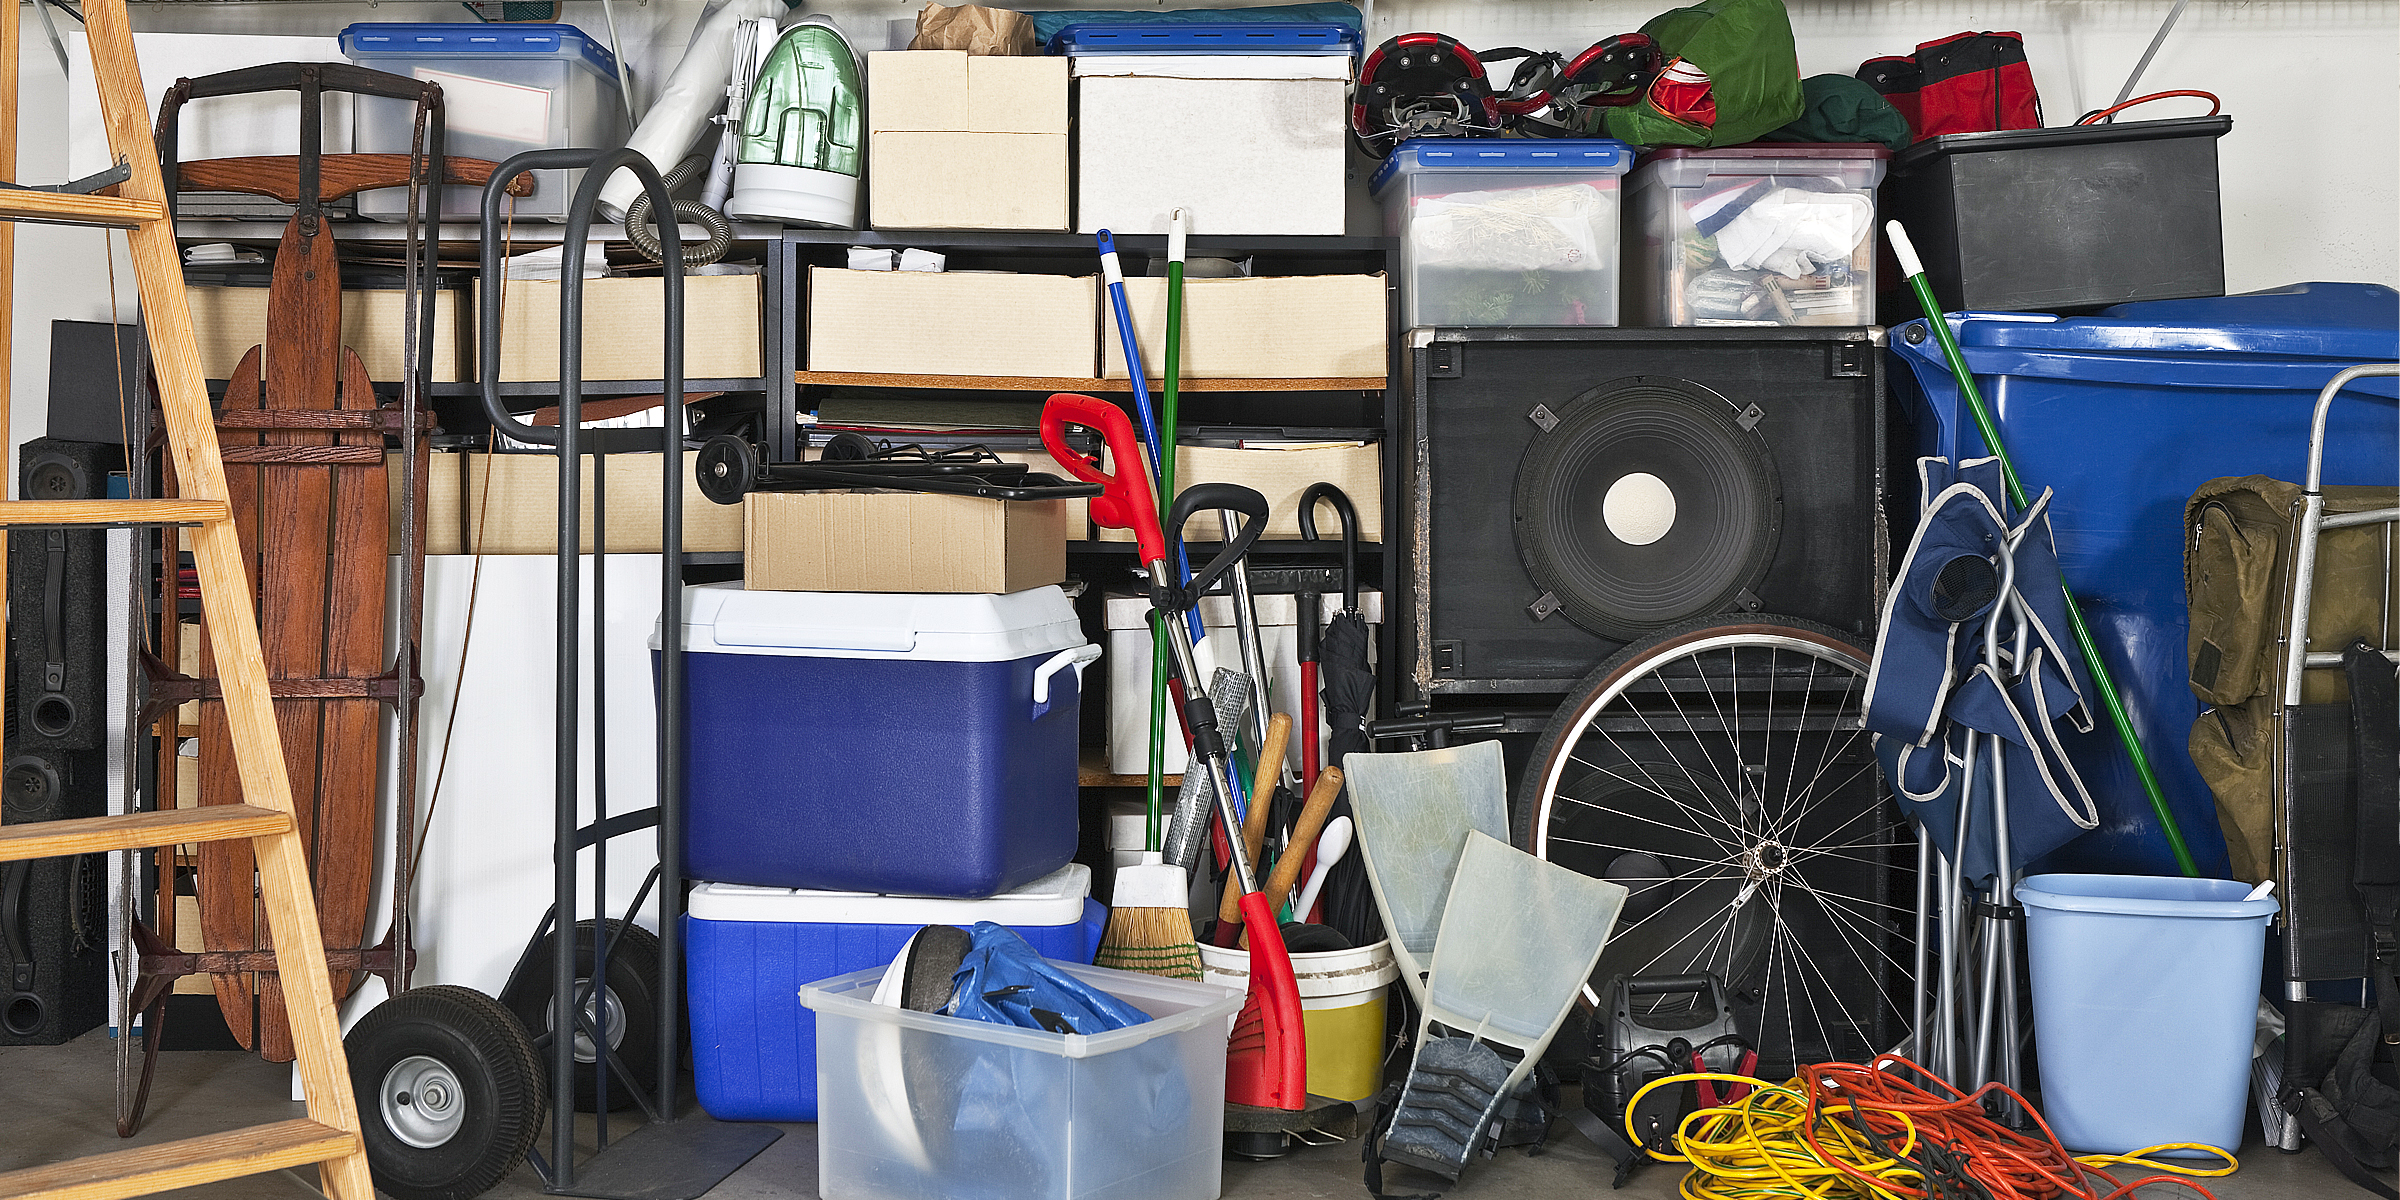 Garage filled with boxes | Source: Shutterstock